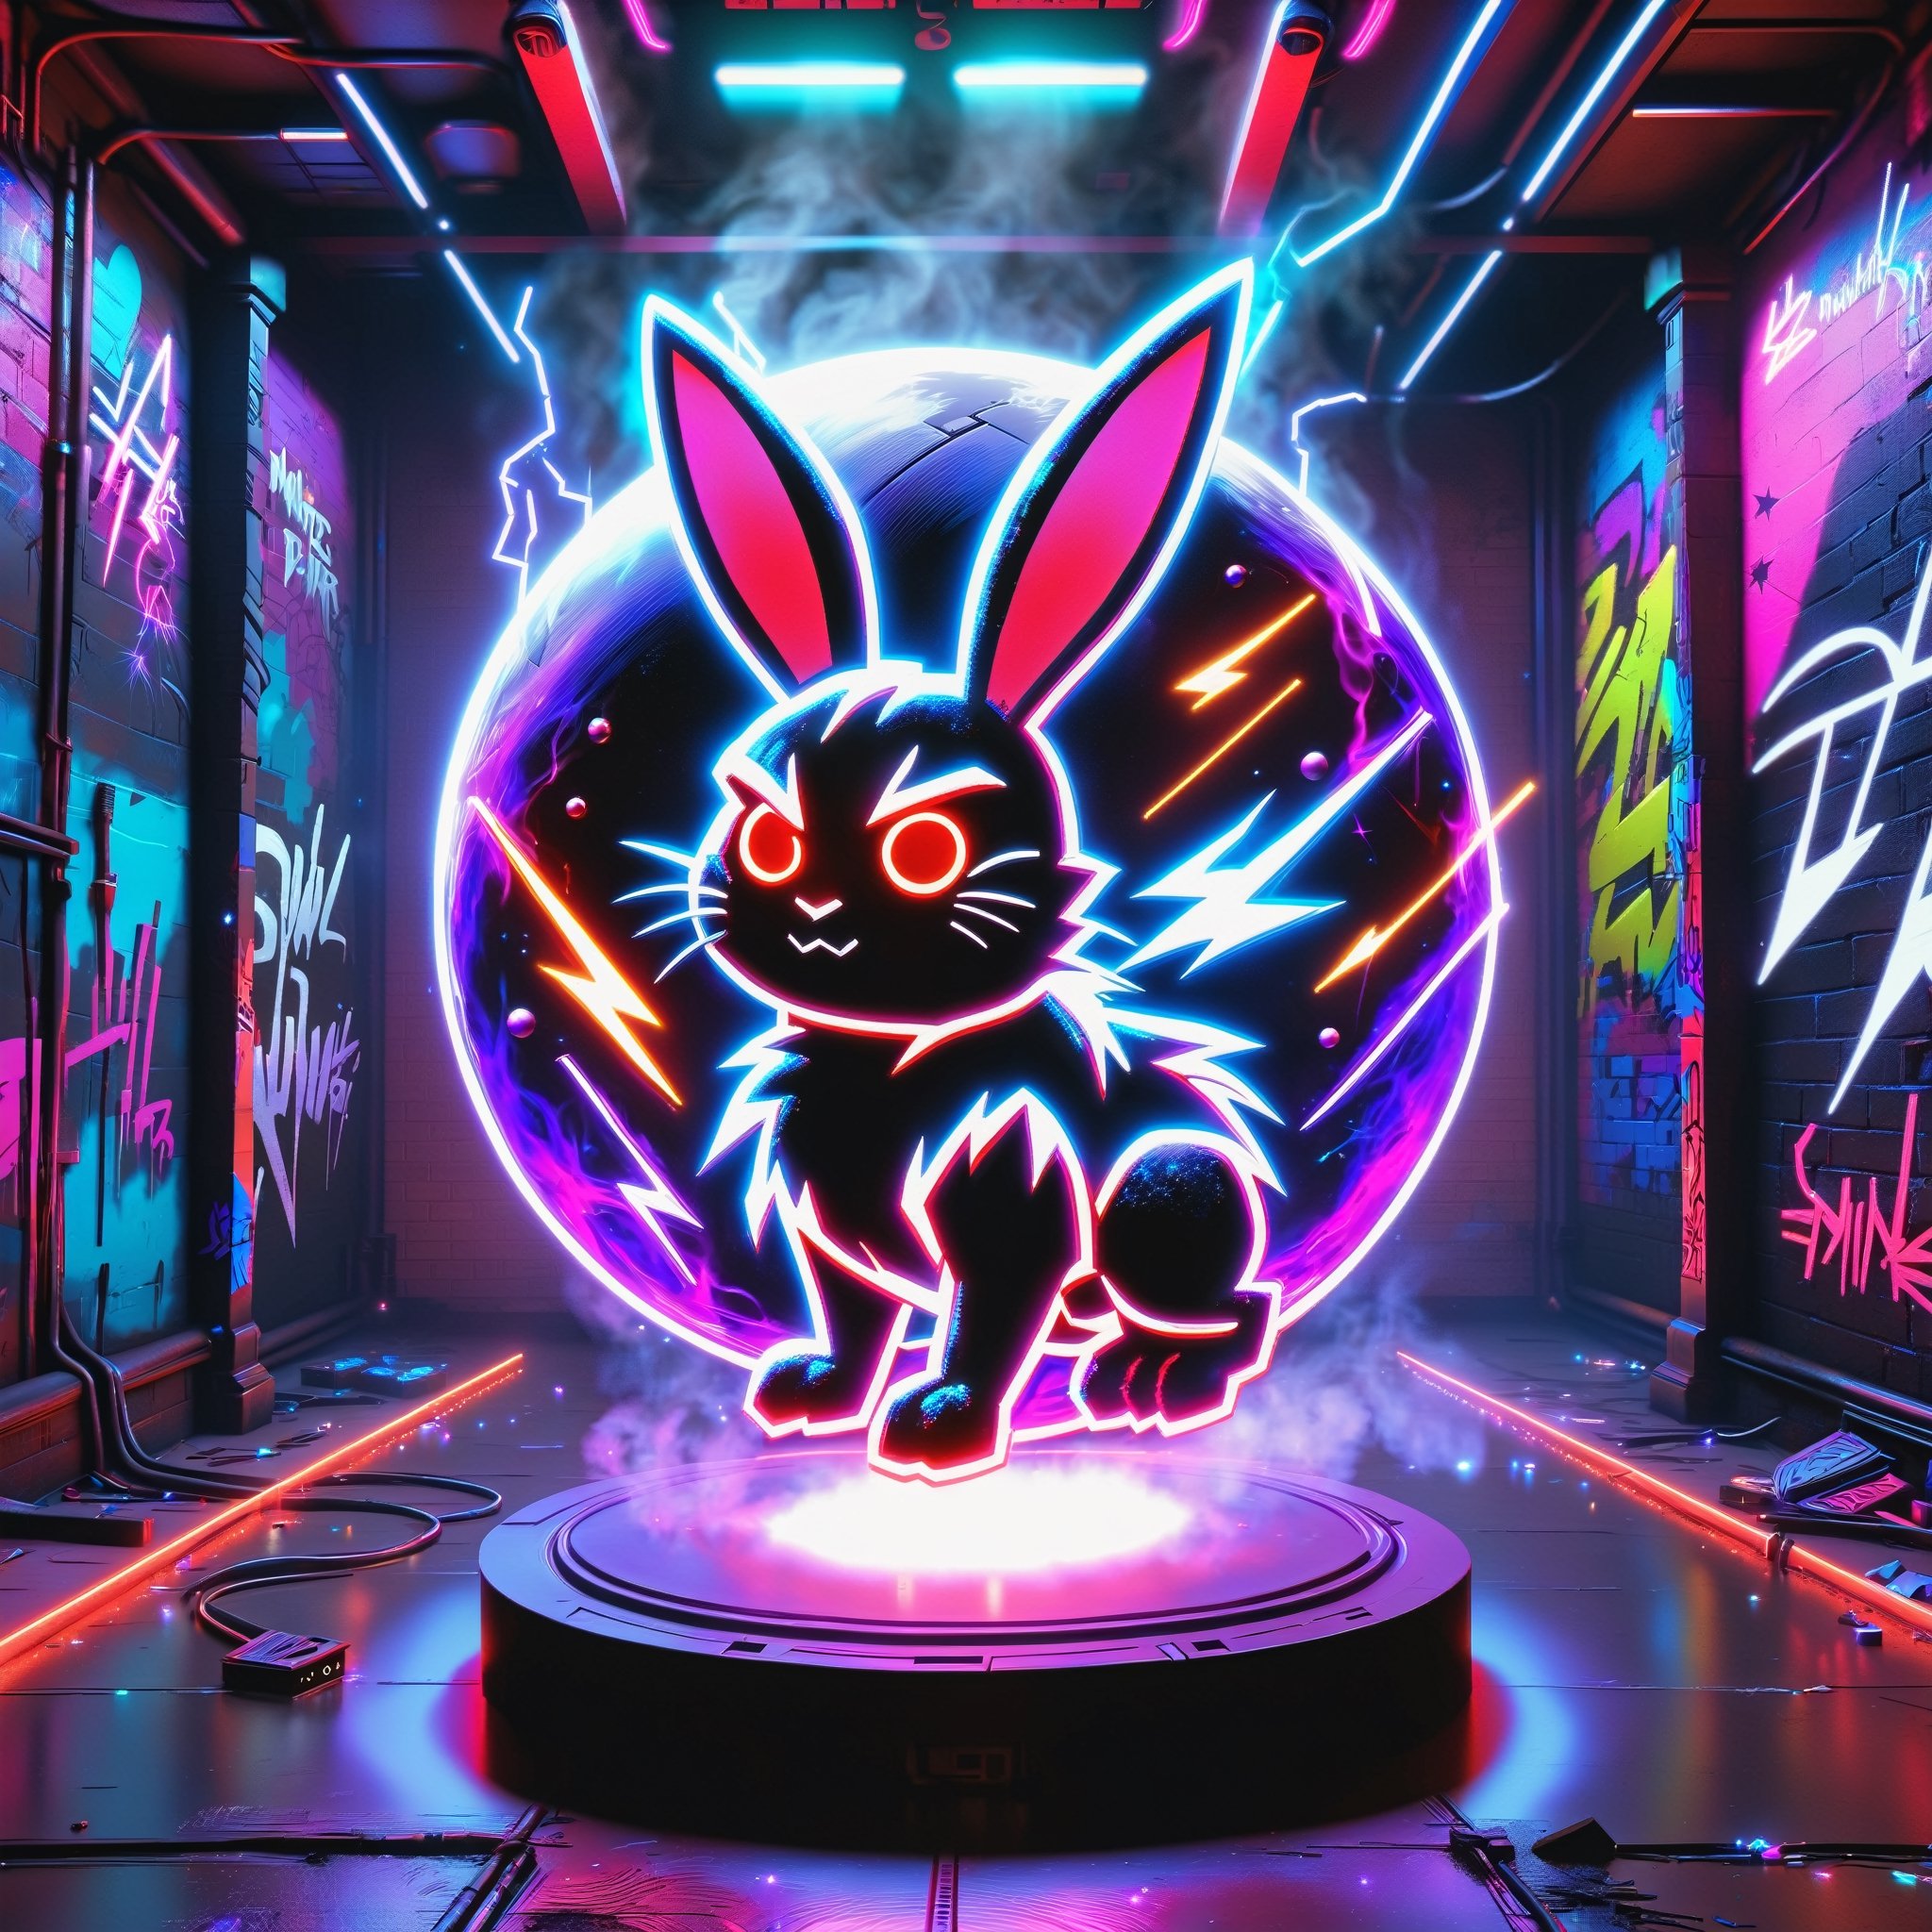 "Bad Bunny" in neon red, black, metallic, purple, blue, Pink, neon, sparkles, smoke, planet, graffiti background,
,composed of elements of thunder Electricity Space stars and neon lights, Cyberpunk,DonMH010D15pl4yXL 